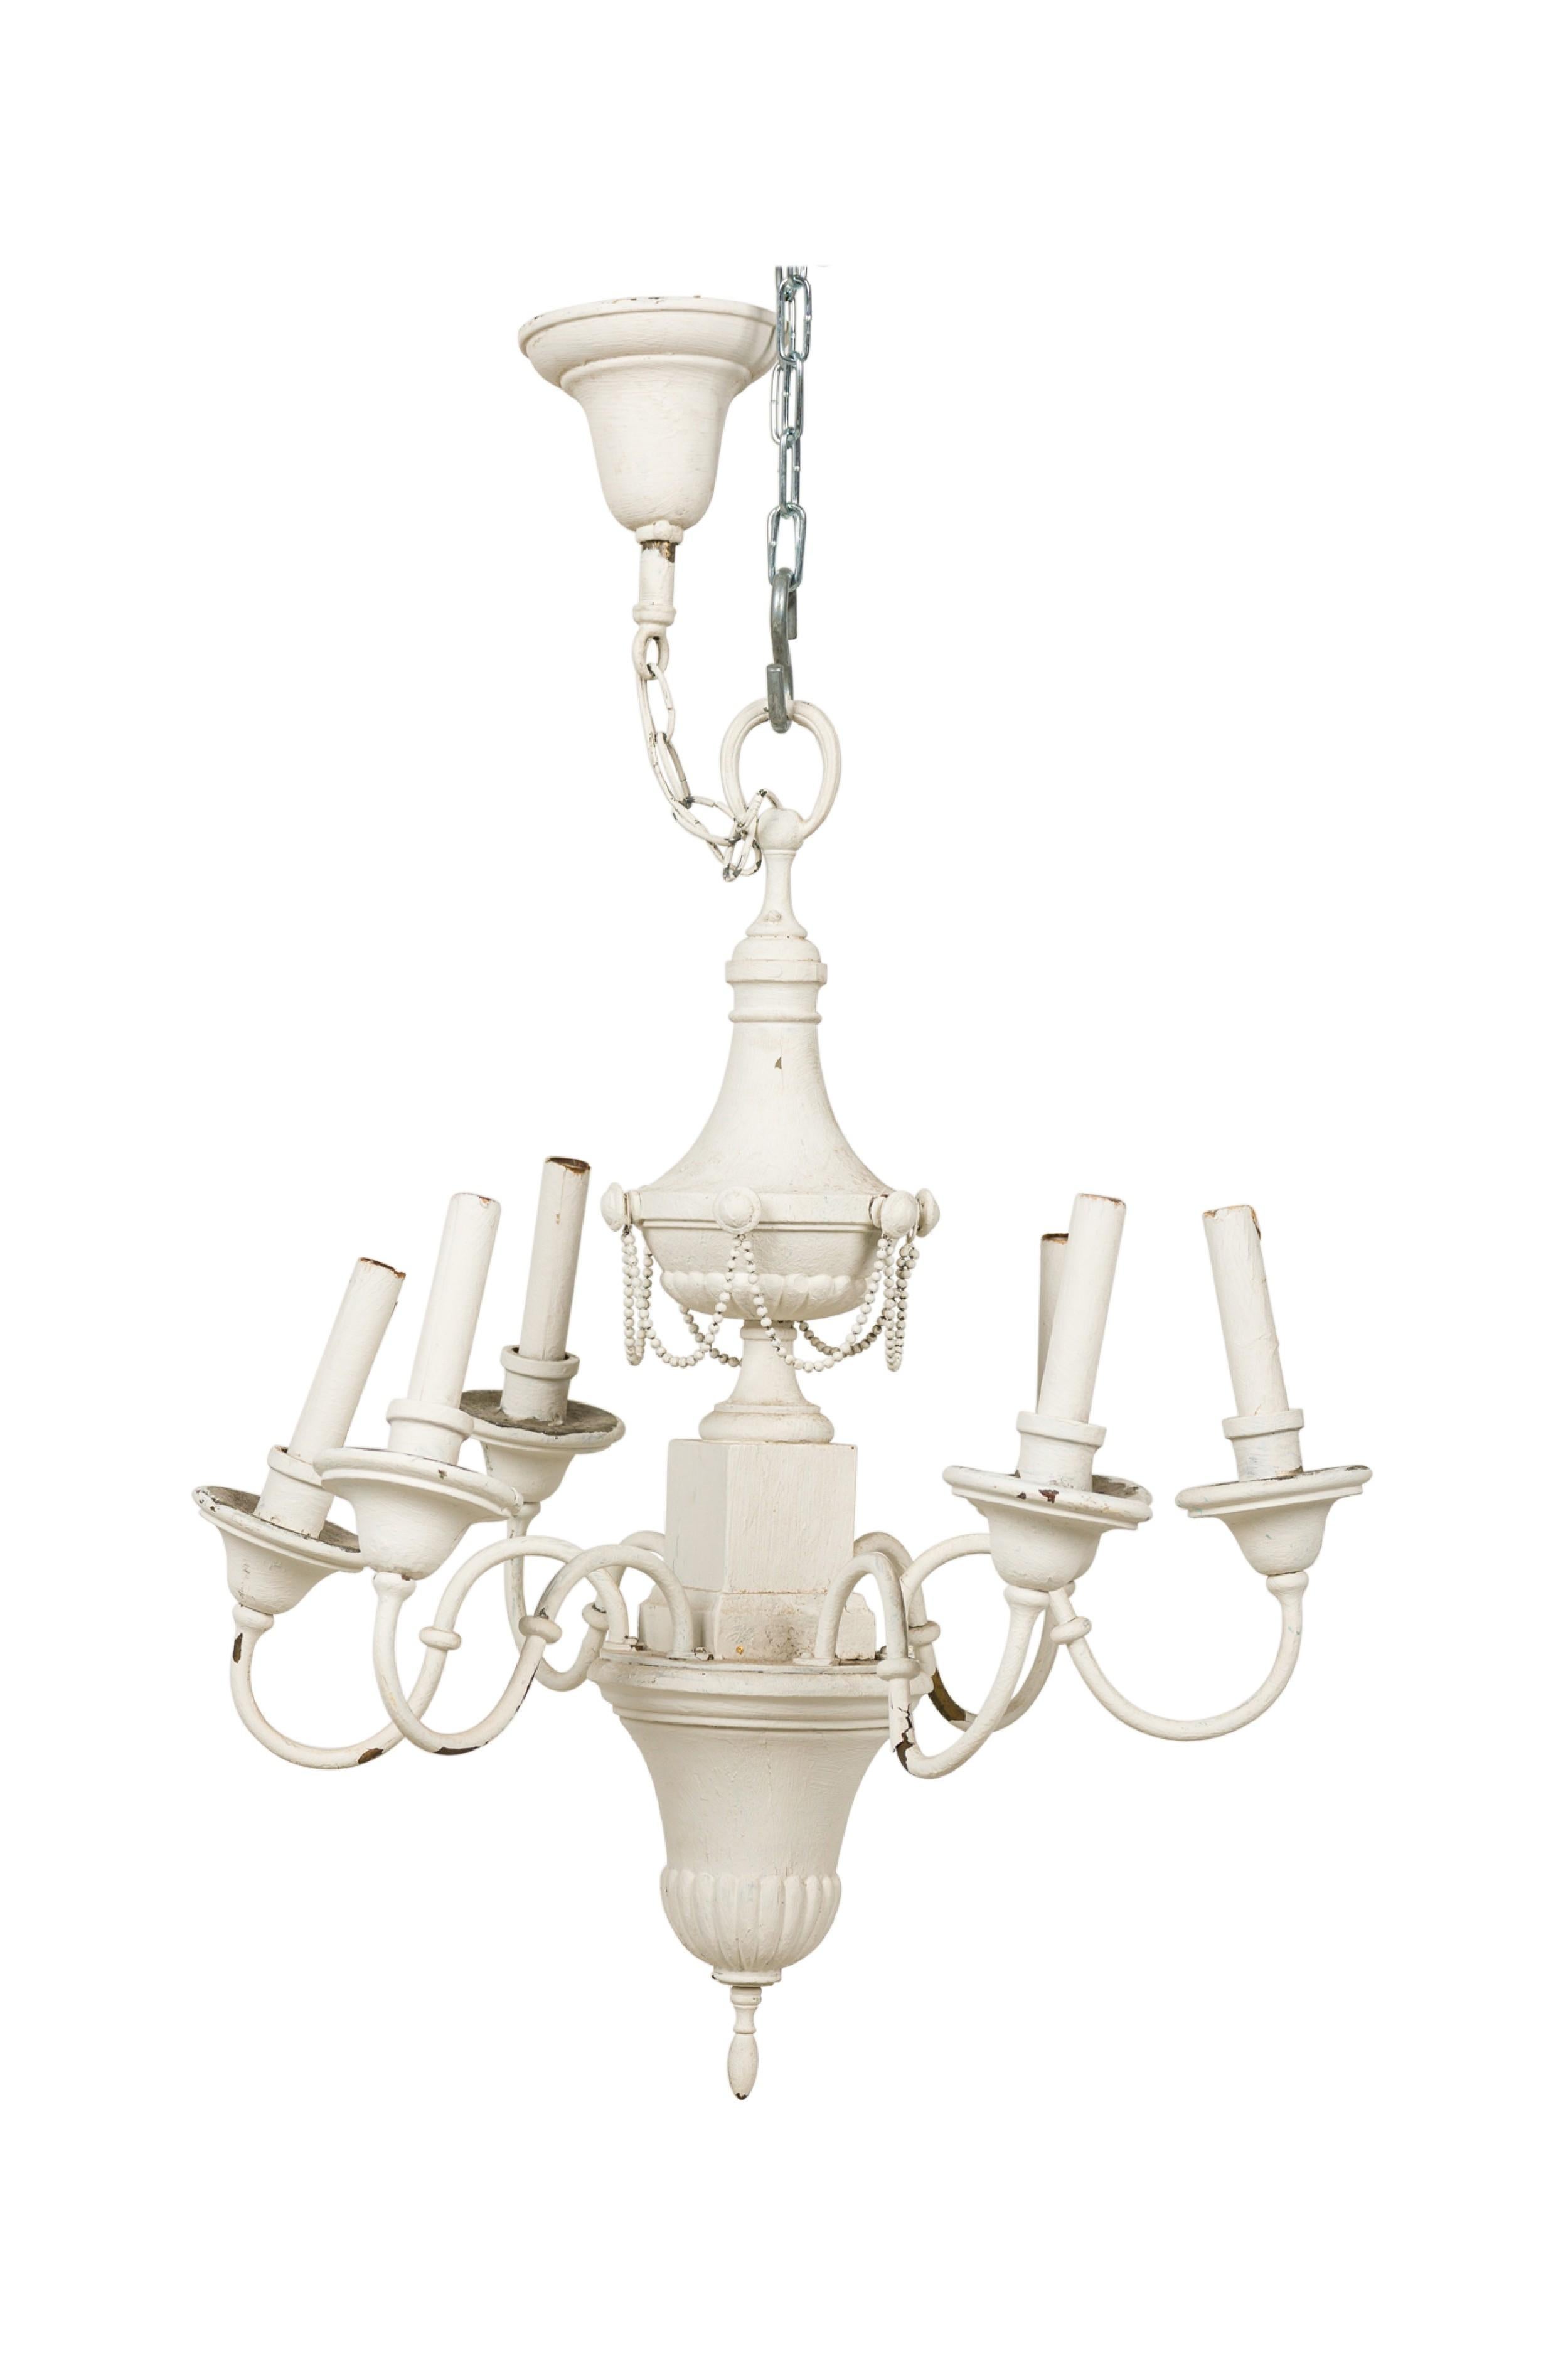 20th Century French Empire Style White Painted Tole 6-Light Chandelier For Sale